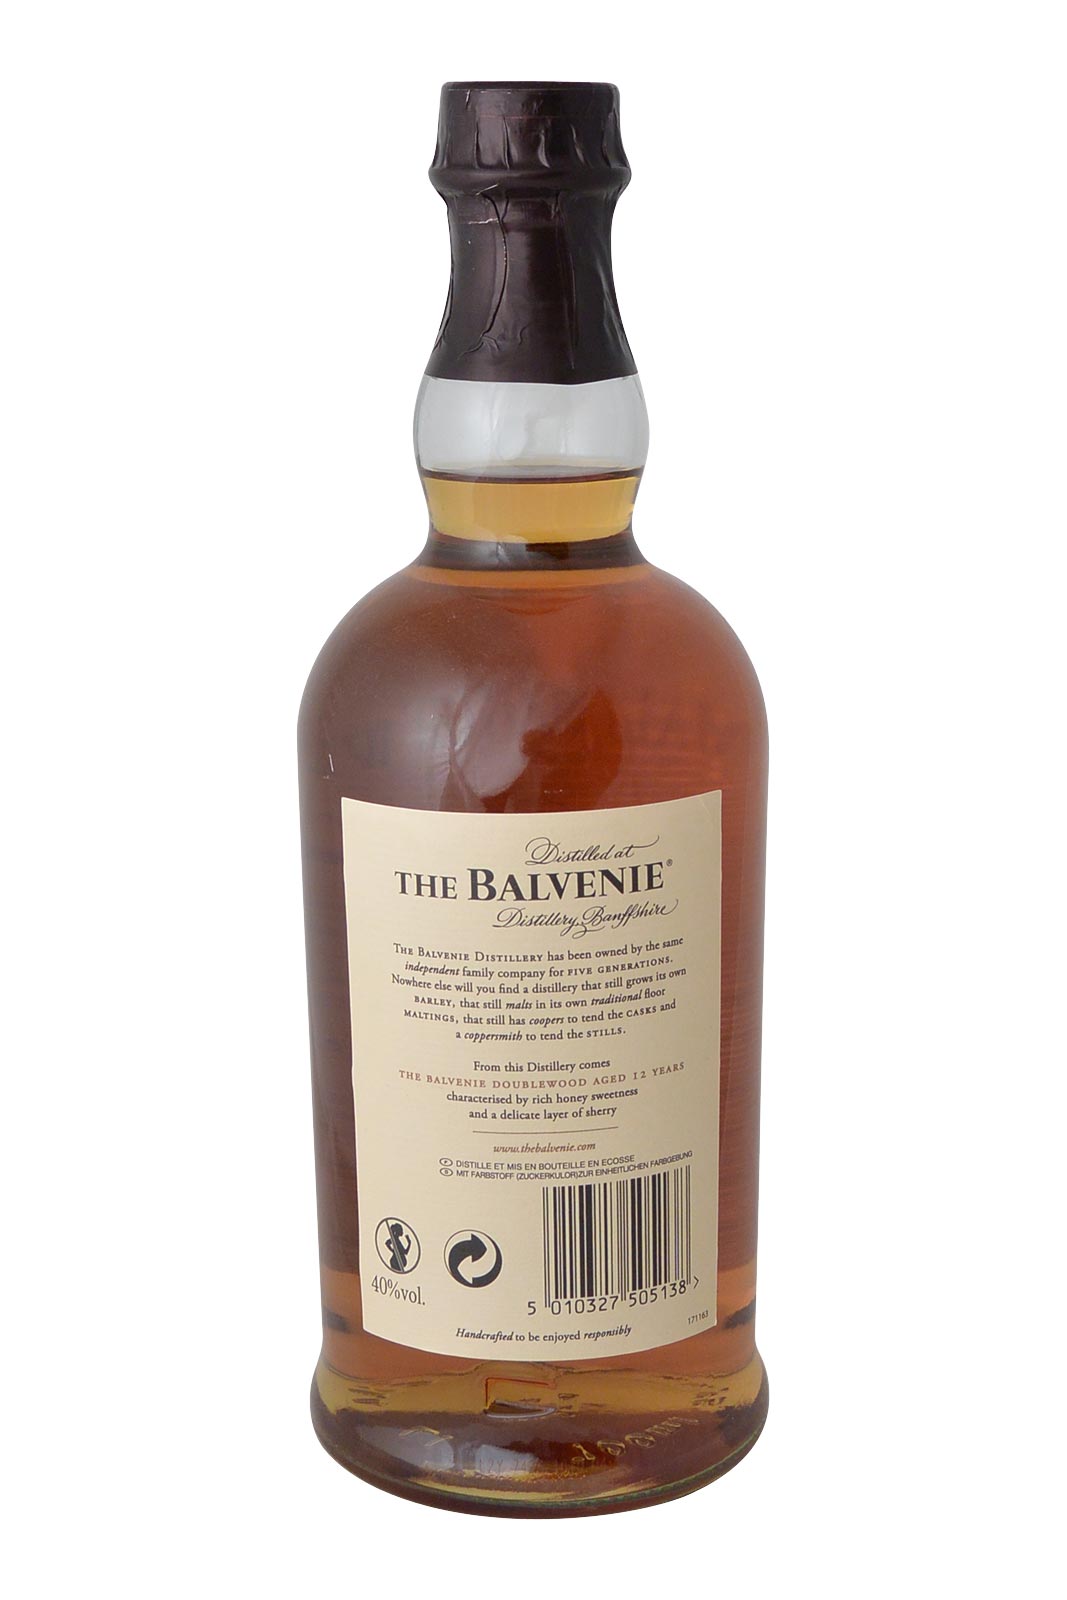 Balvenie Double Wood 12 Year Old